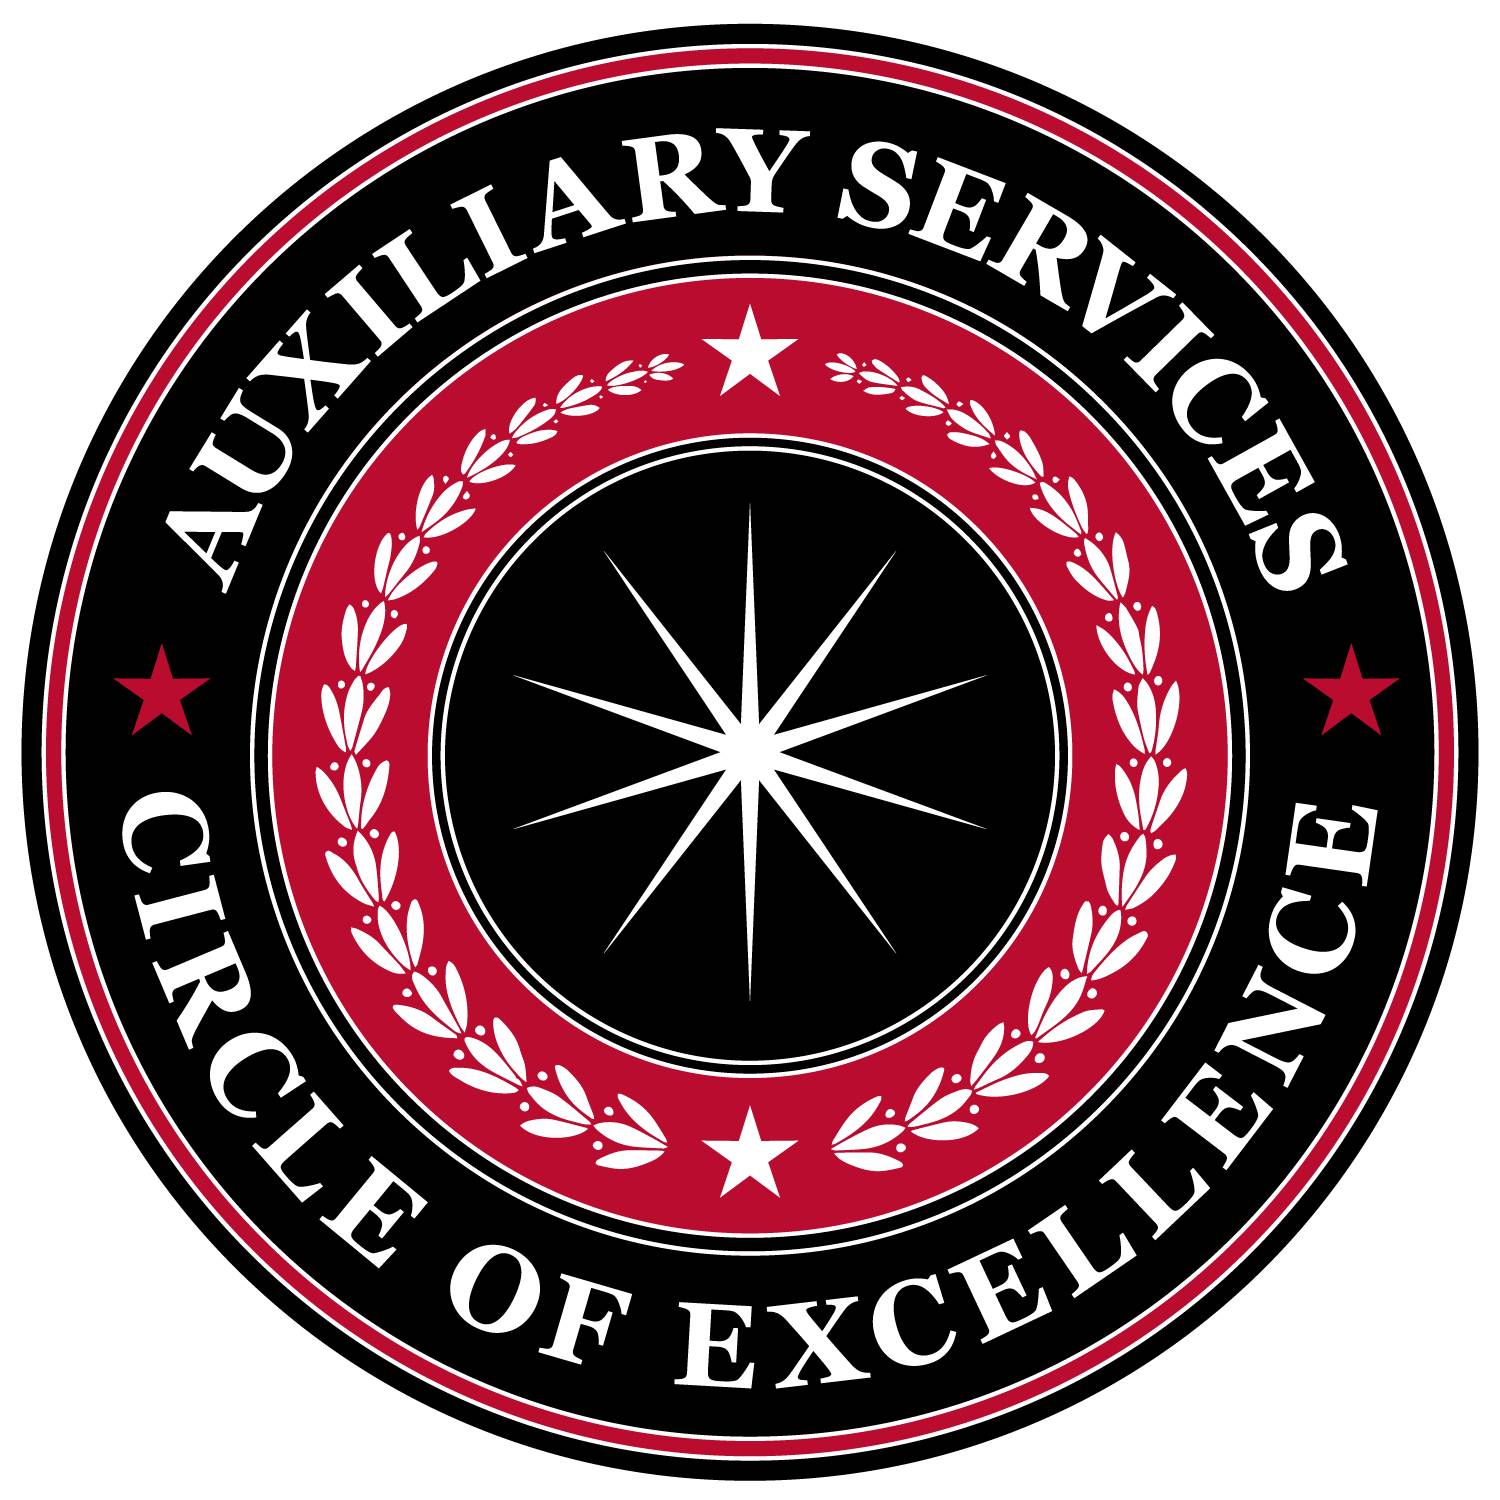 A circular, red and black graphic resembling a seal with text that reads, "AUXILIARY SERVICES CIRCLE OF EXCELLENCE."